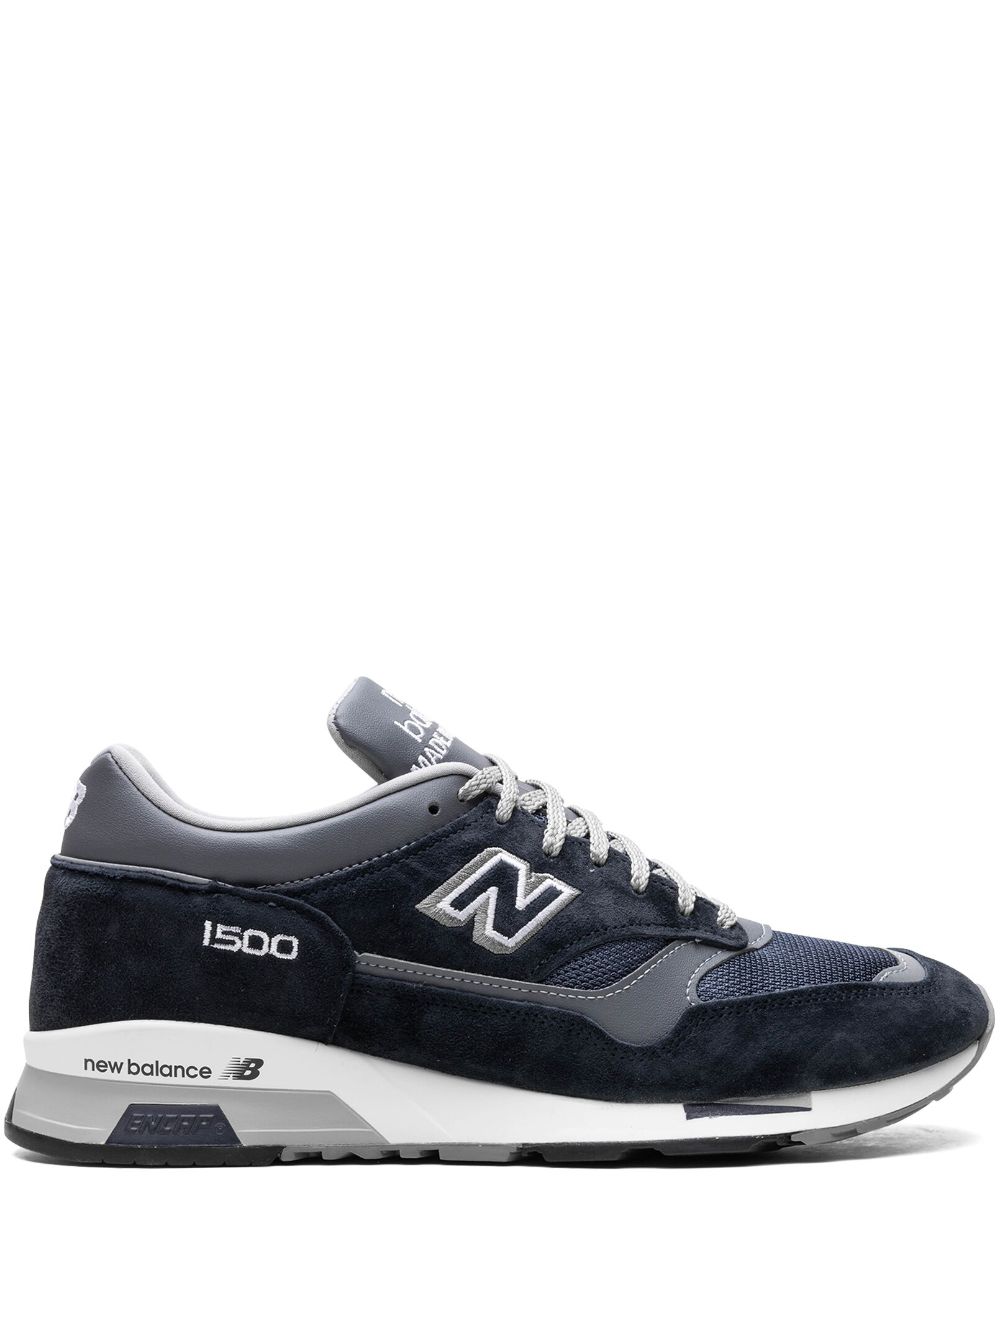 New Balance 1500 "Made in UK" sneakers - Blue von New Balance